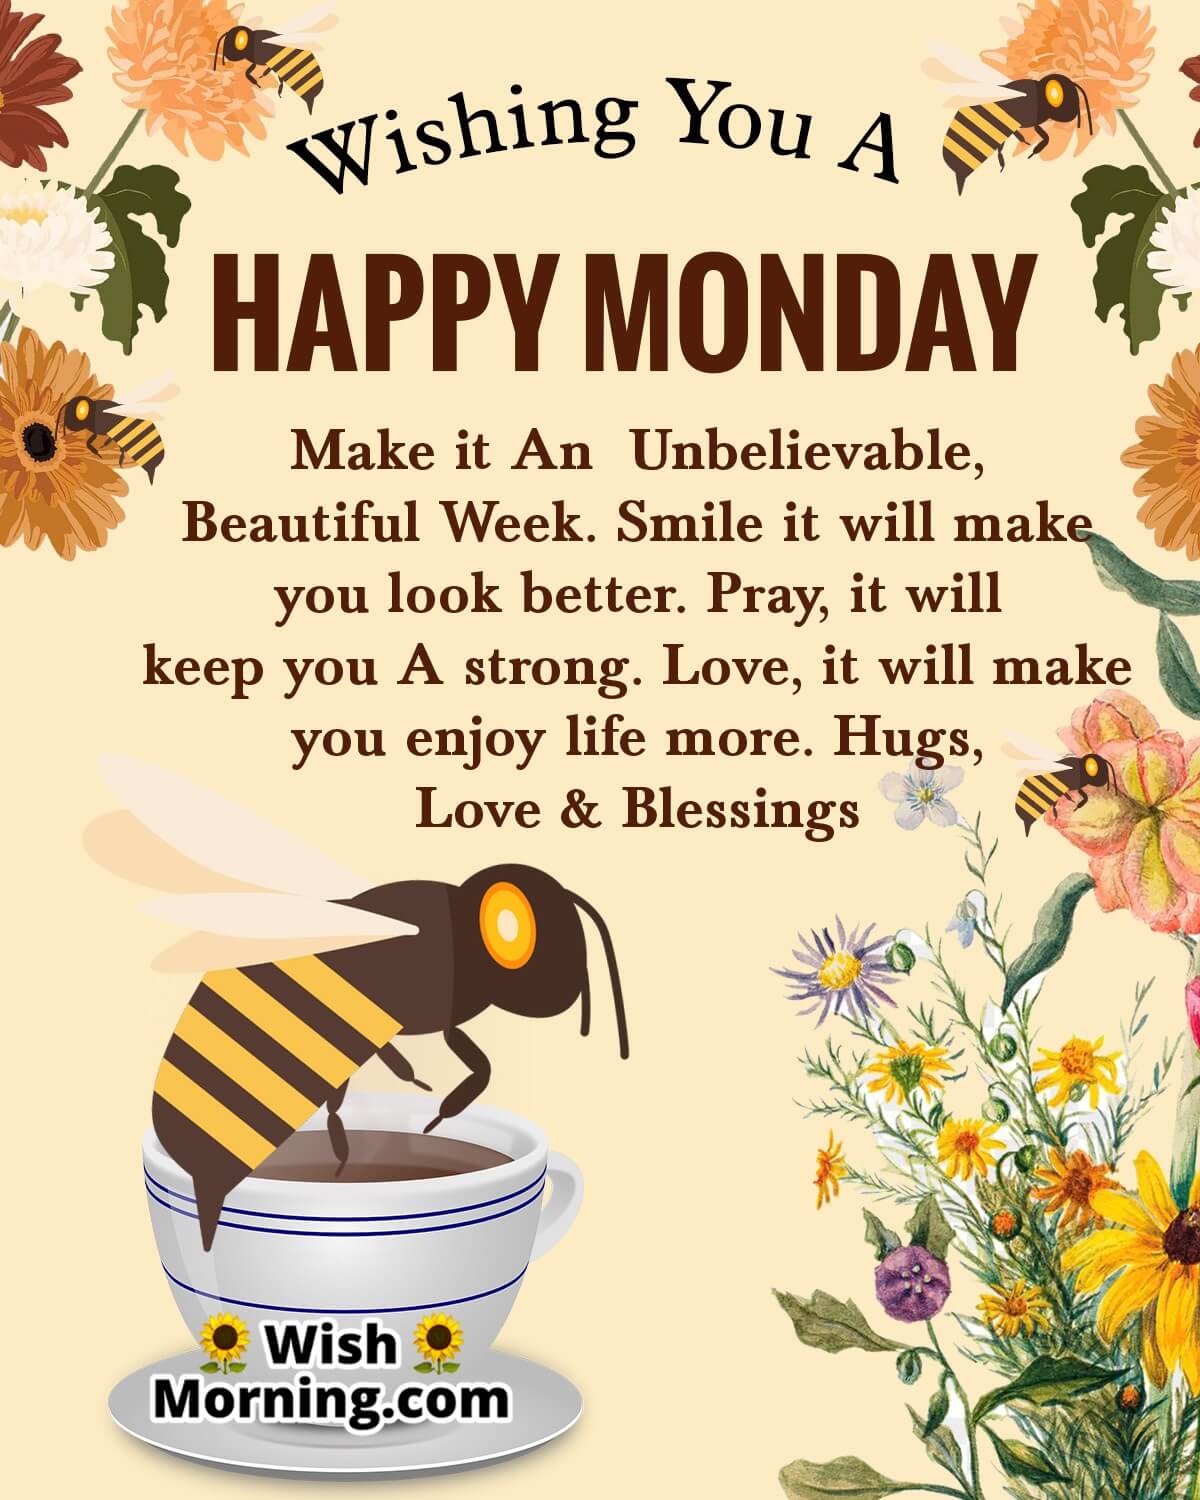 Wishing You A Happy Monday